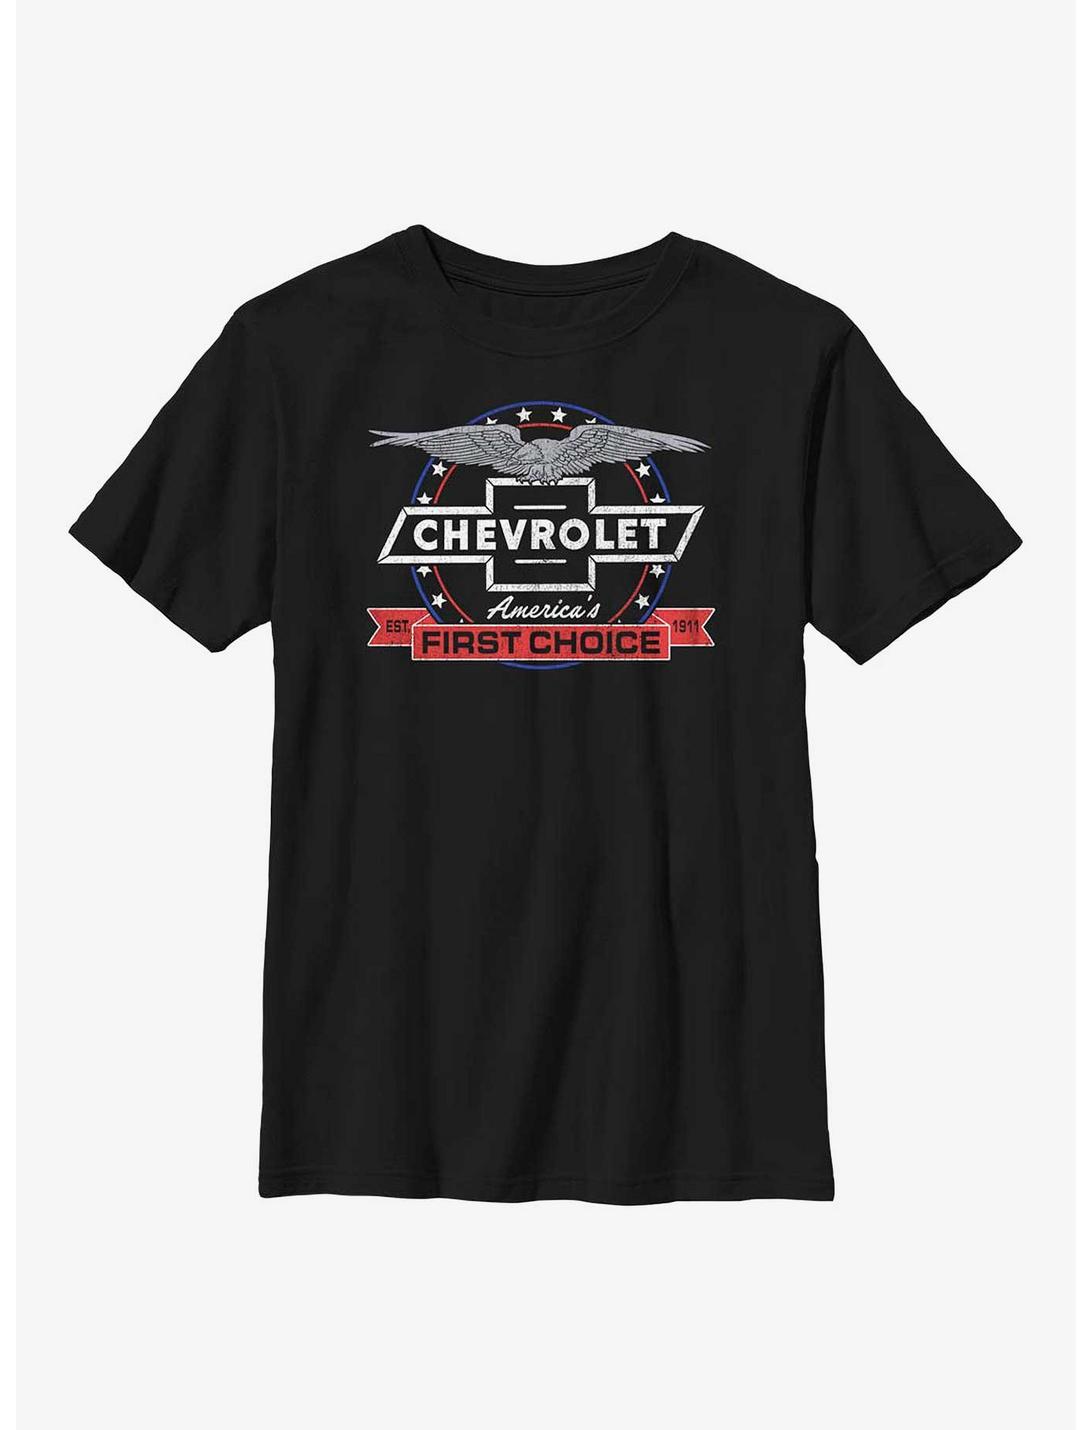 General Motors Chevrolet America's First Choice Youth T-Shirt, BLACK, hi-res